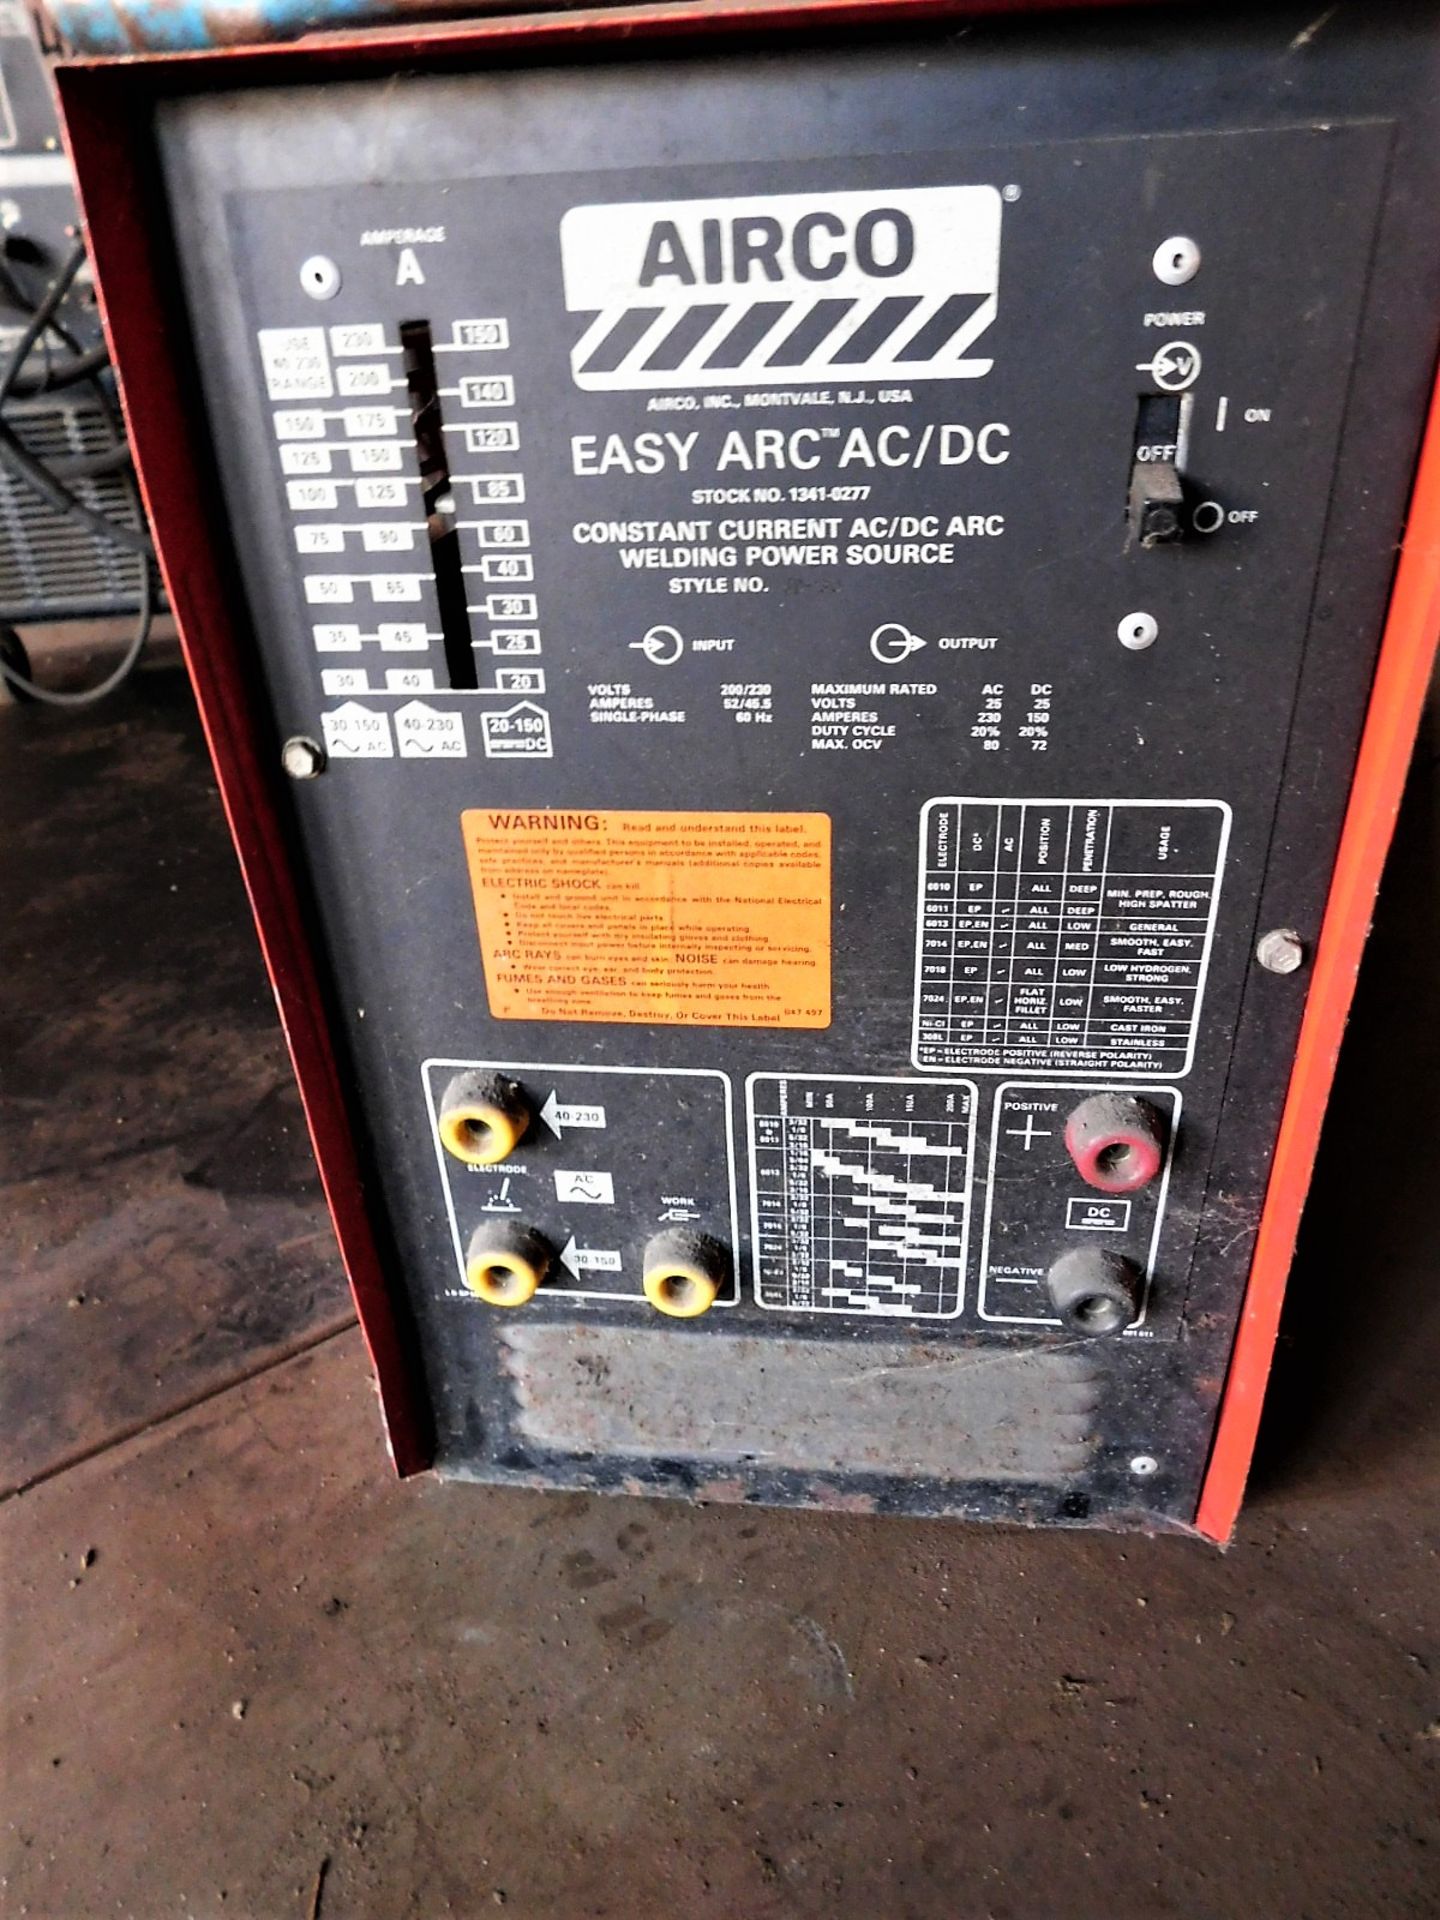 AIRCO EASY ARC AC/DC ARC WELDING POWER SOURCE, STOCK NO. 1341-0277, MODEL JD-30 - Image 2 of 3